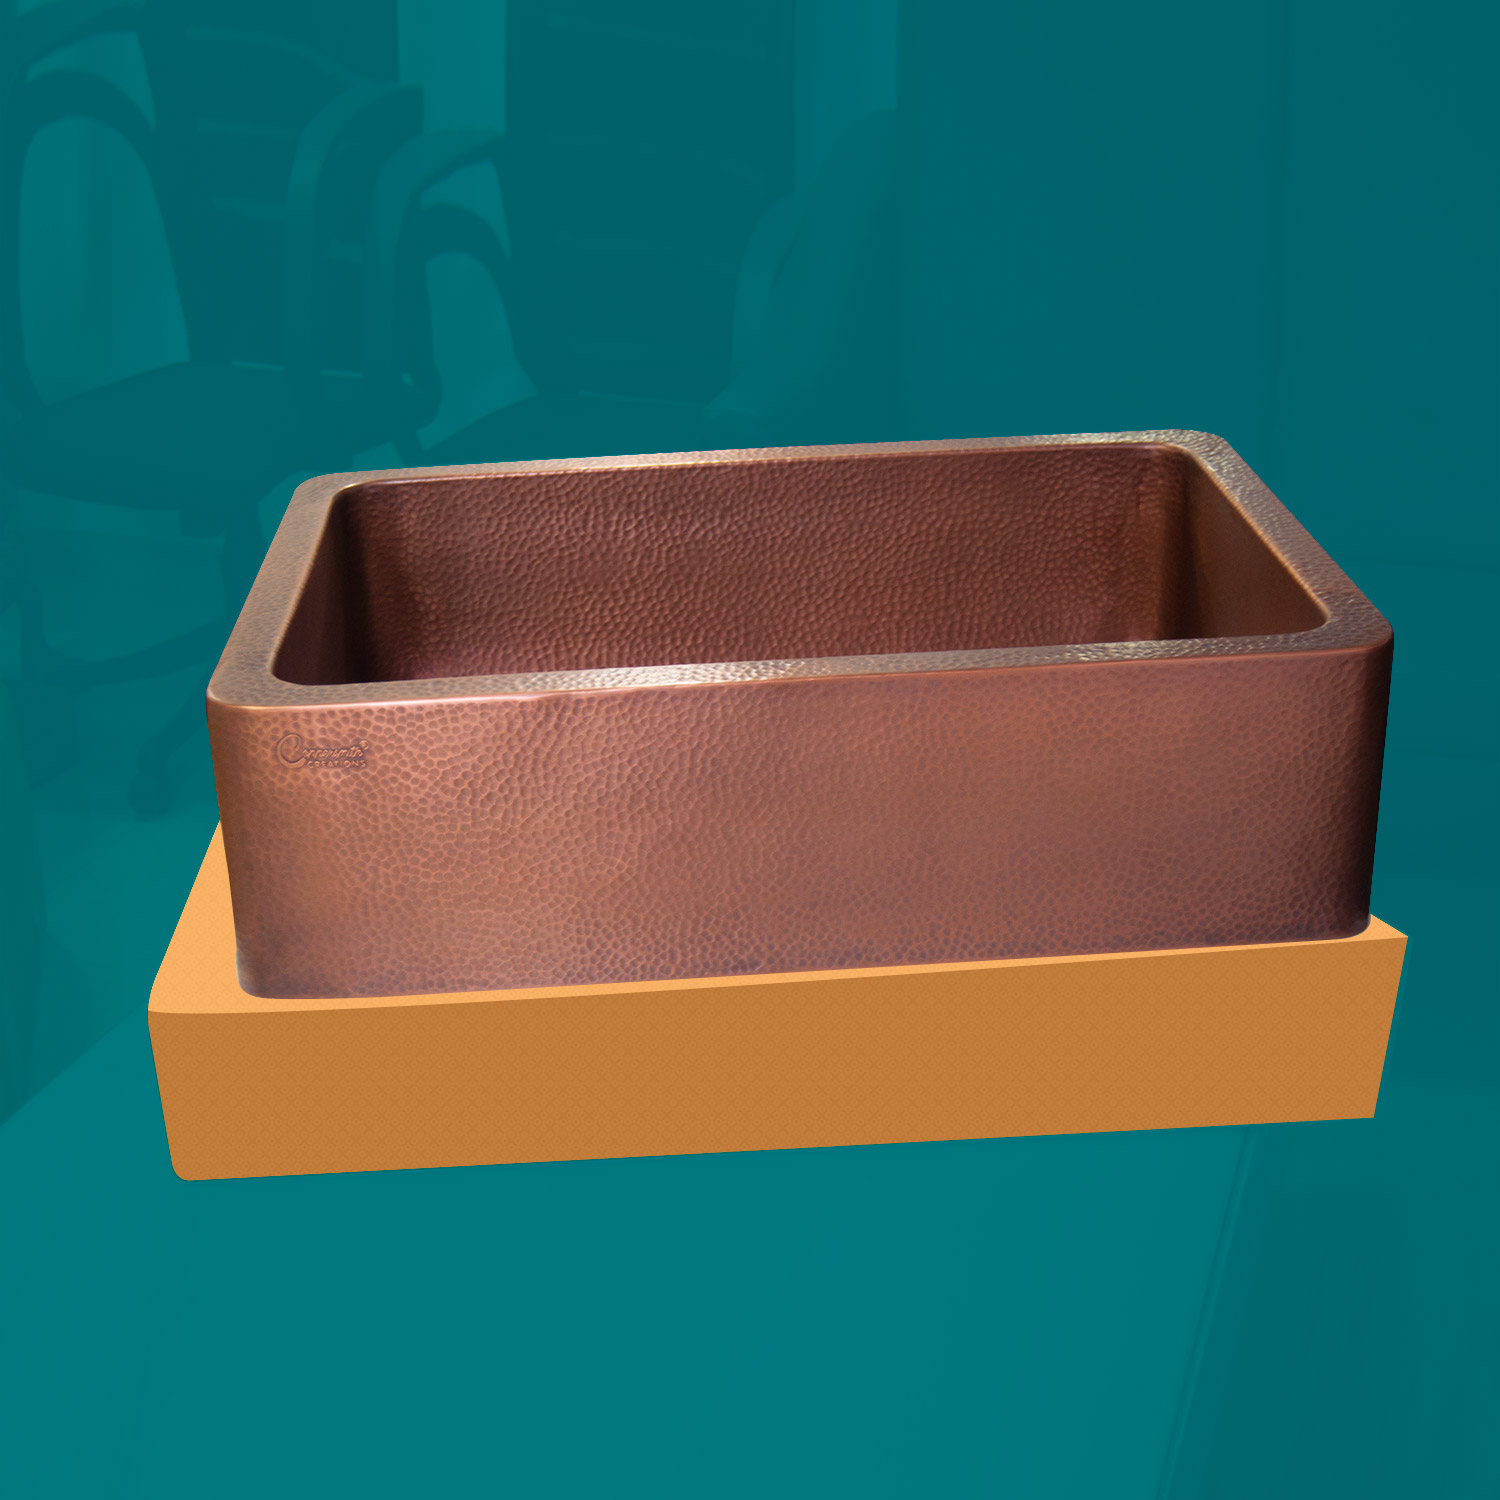 D Shape Hammered Front Apron Copper Kitchen Sink - Stock Clearance